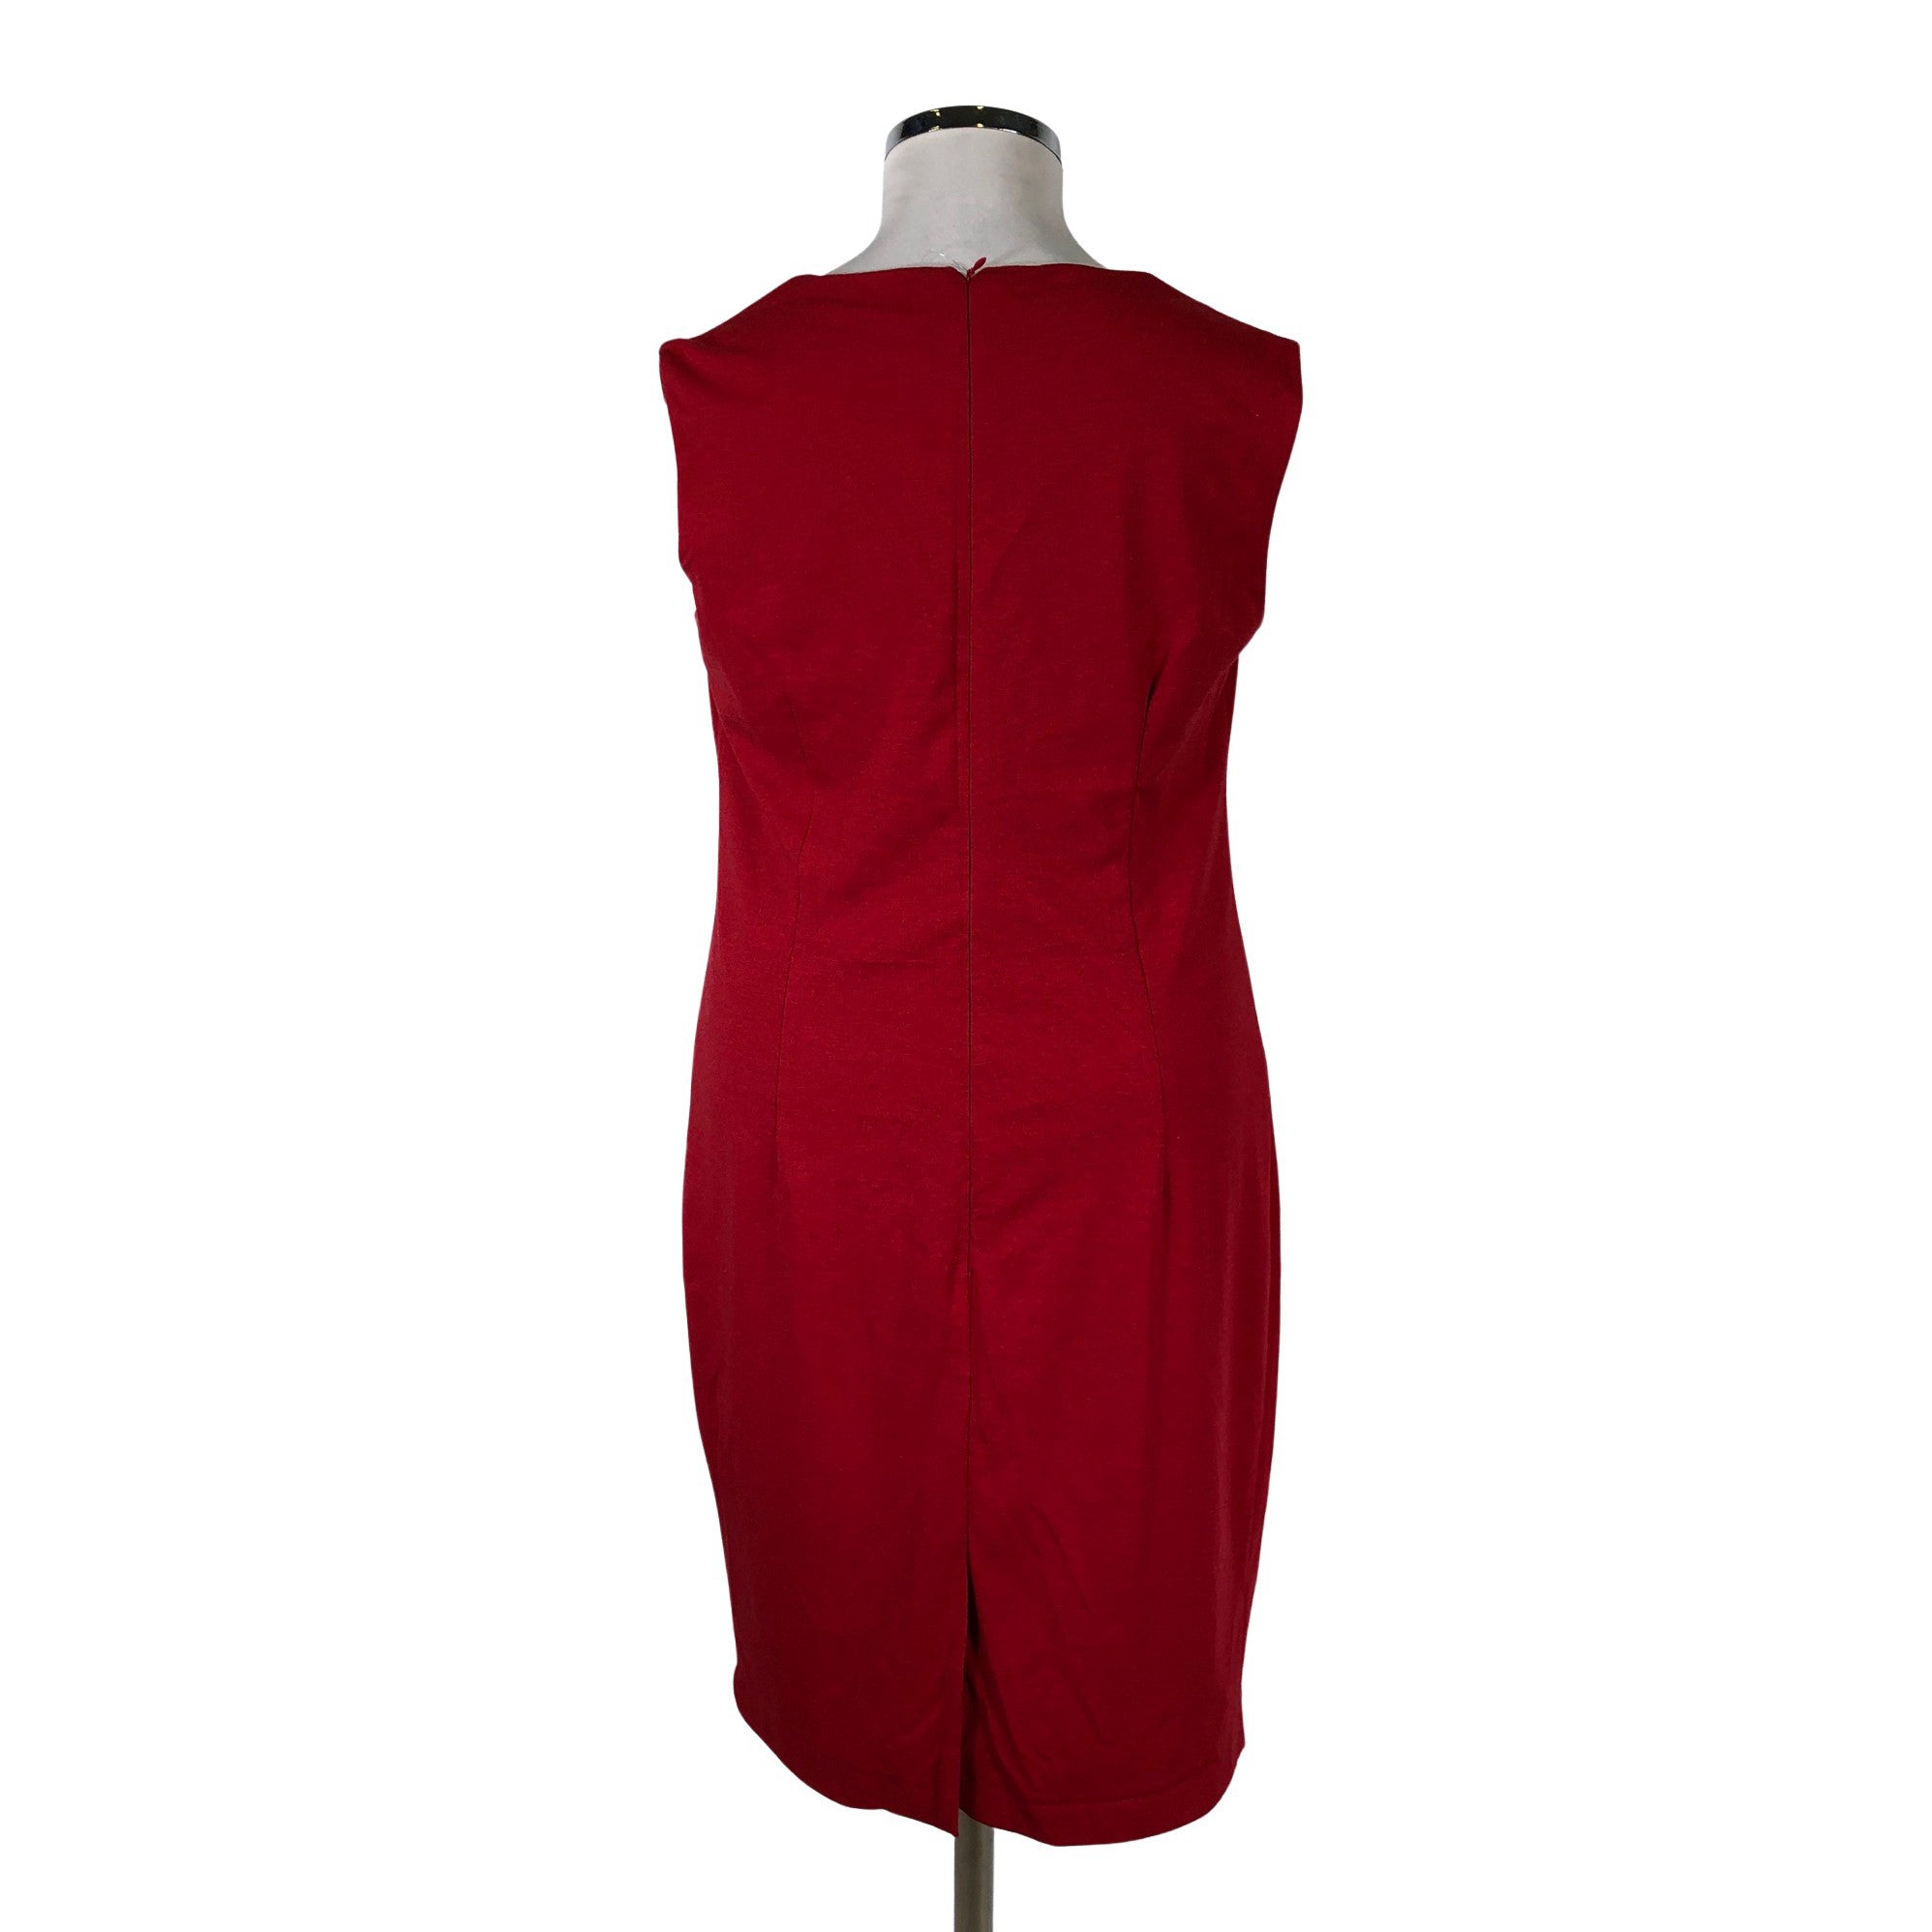 Women's Ril's Tricot dress, size 42 (Red) | Emmy